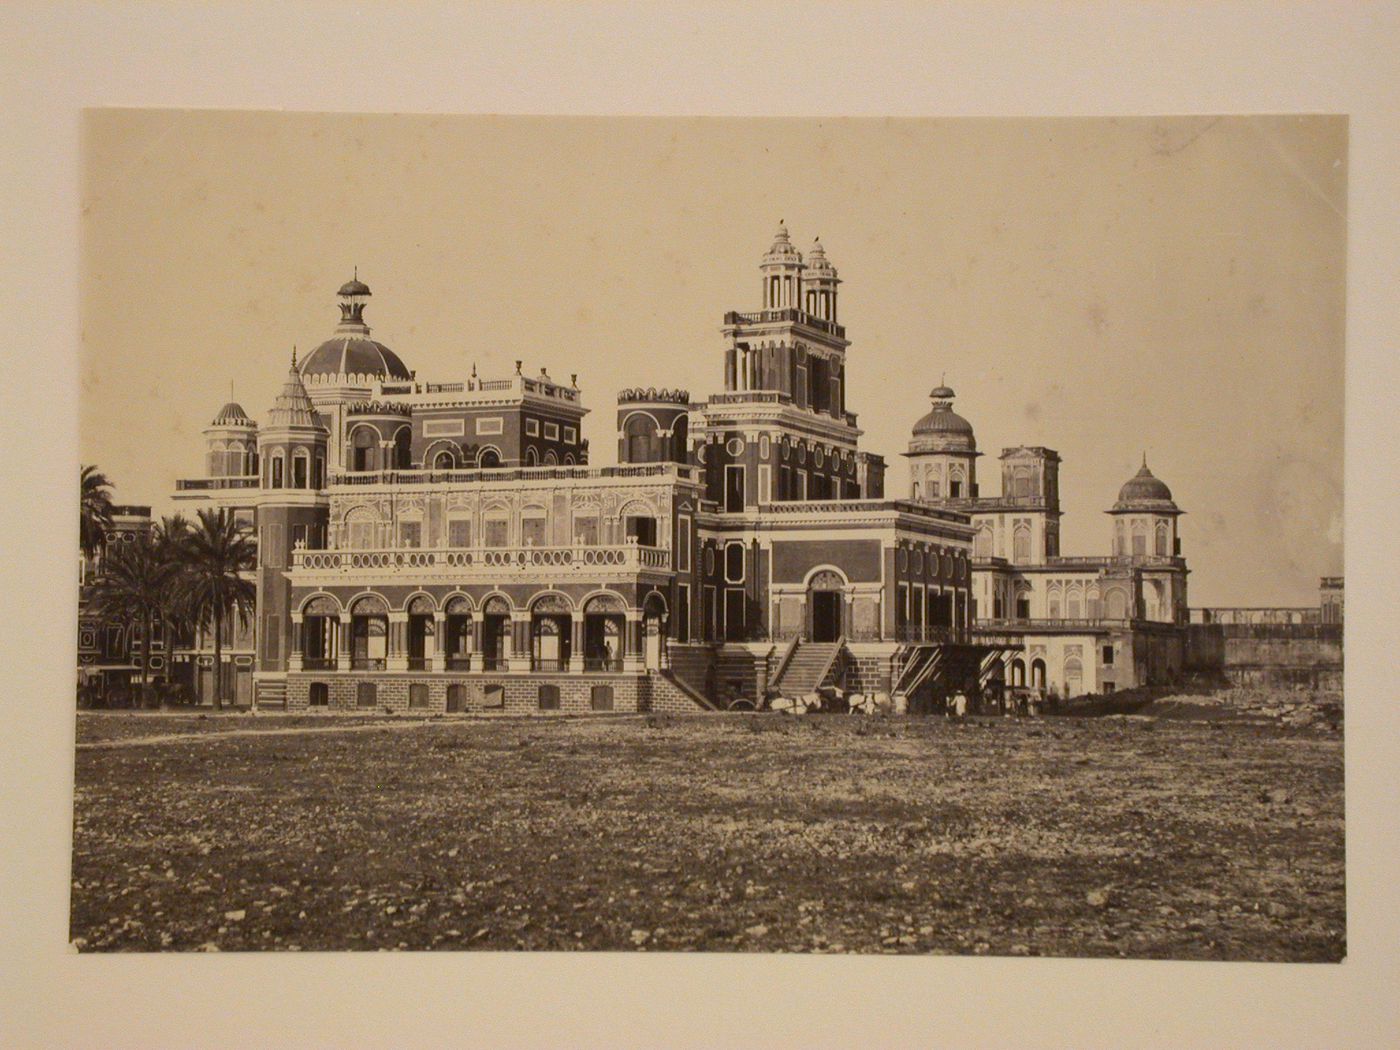 View of the Chattar Manzil [Umbrella Palaces], Lucknow, India